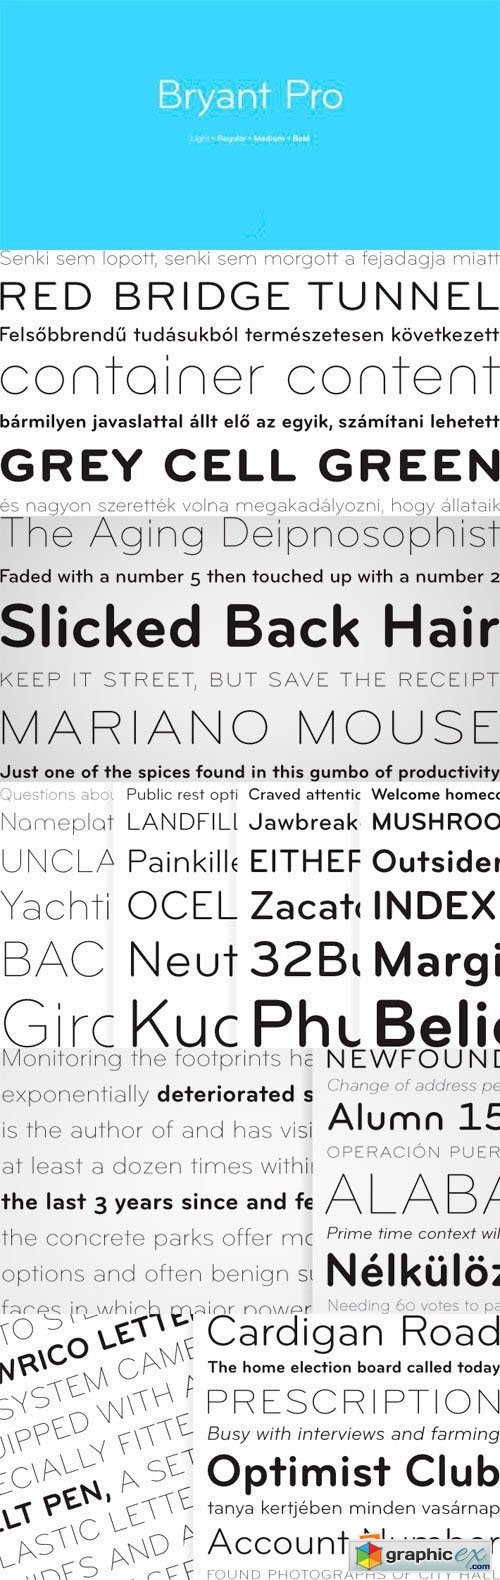 Bryant Pro Font Family - 12 Fonts for $275